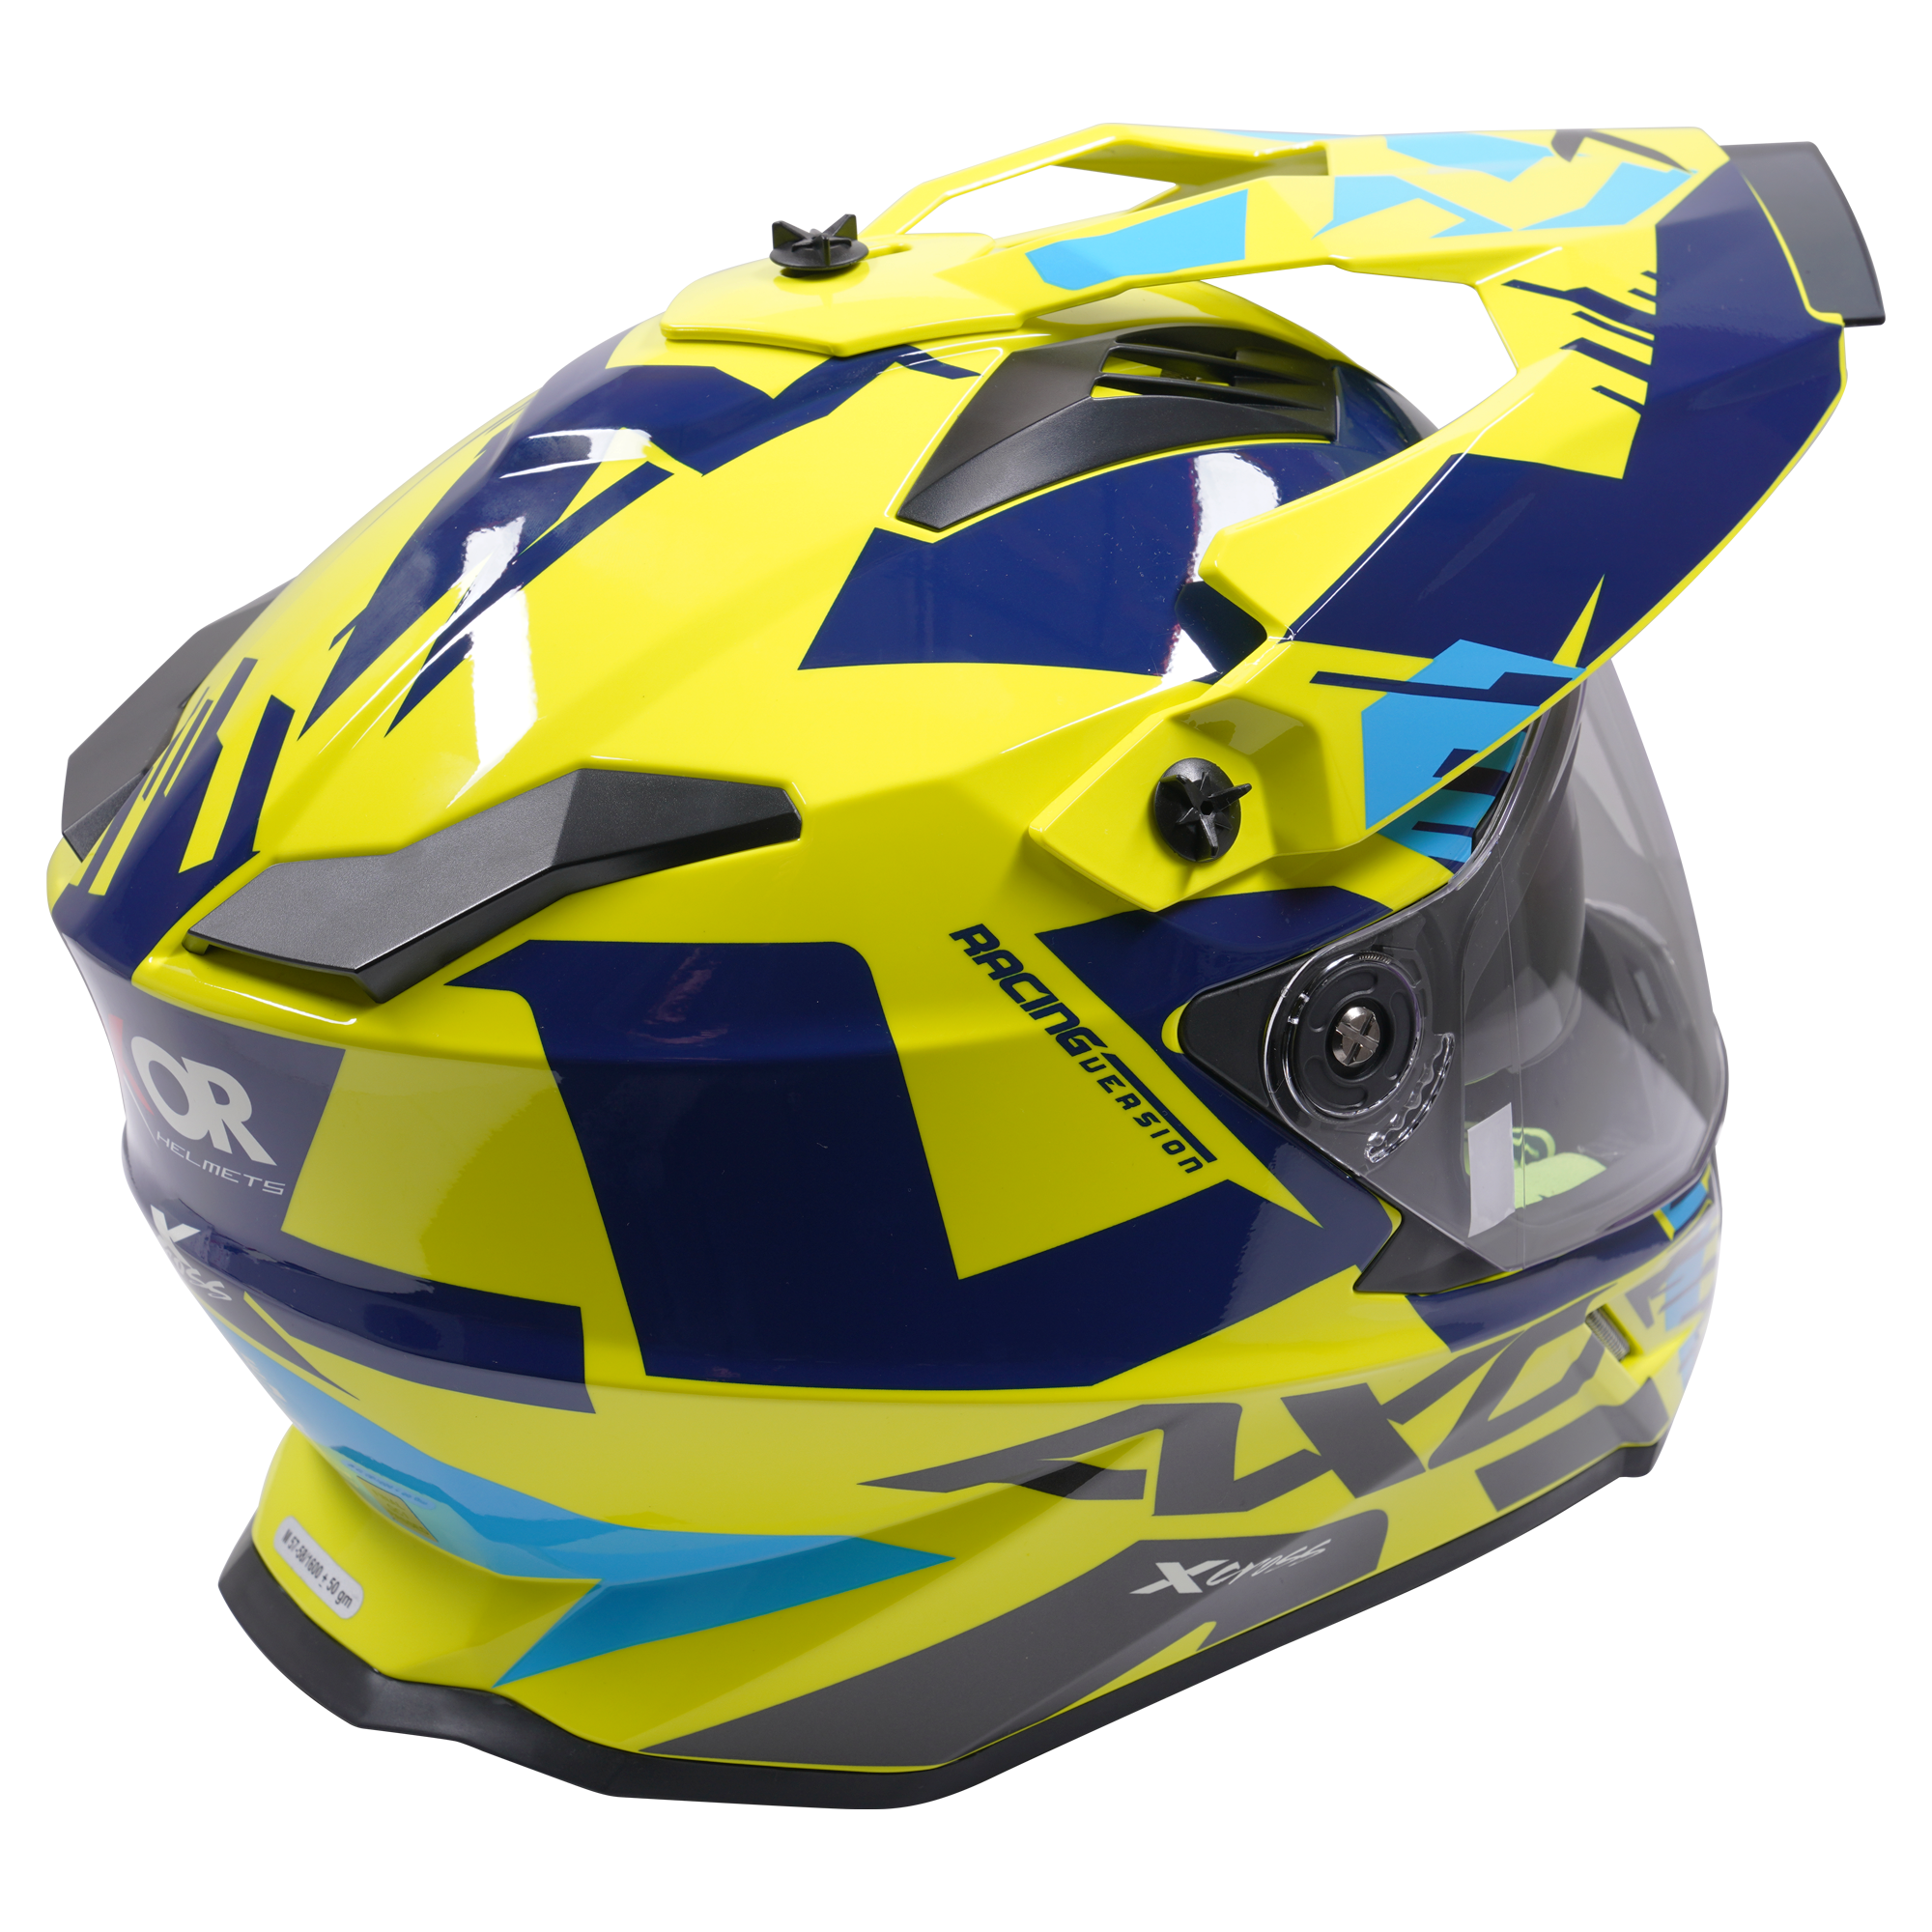 Load image into Gallery viewer, Axor Helmet X-Cross Adventure - Blue/Yellow Graphic
